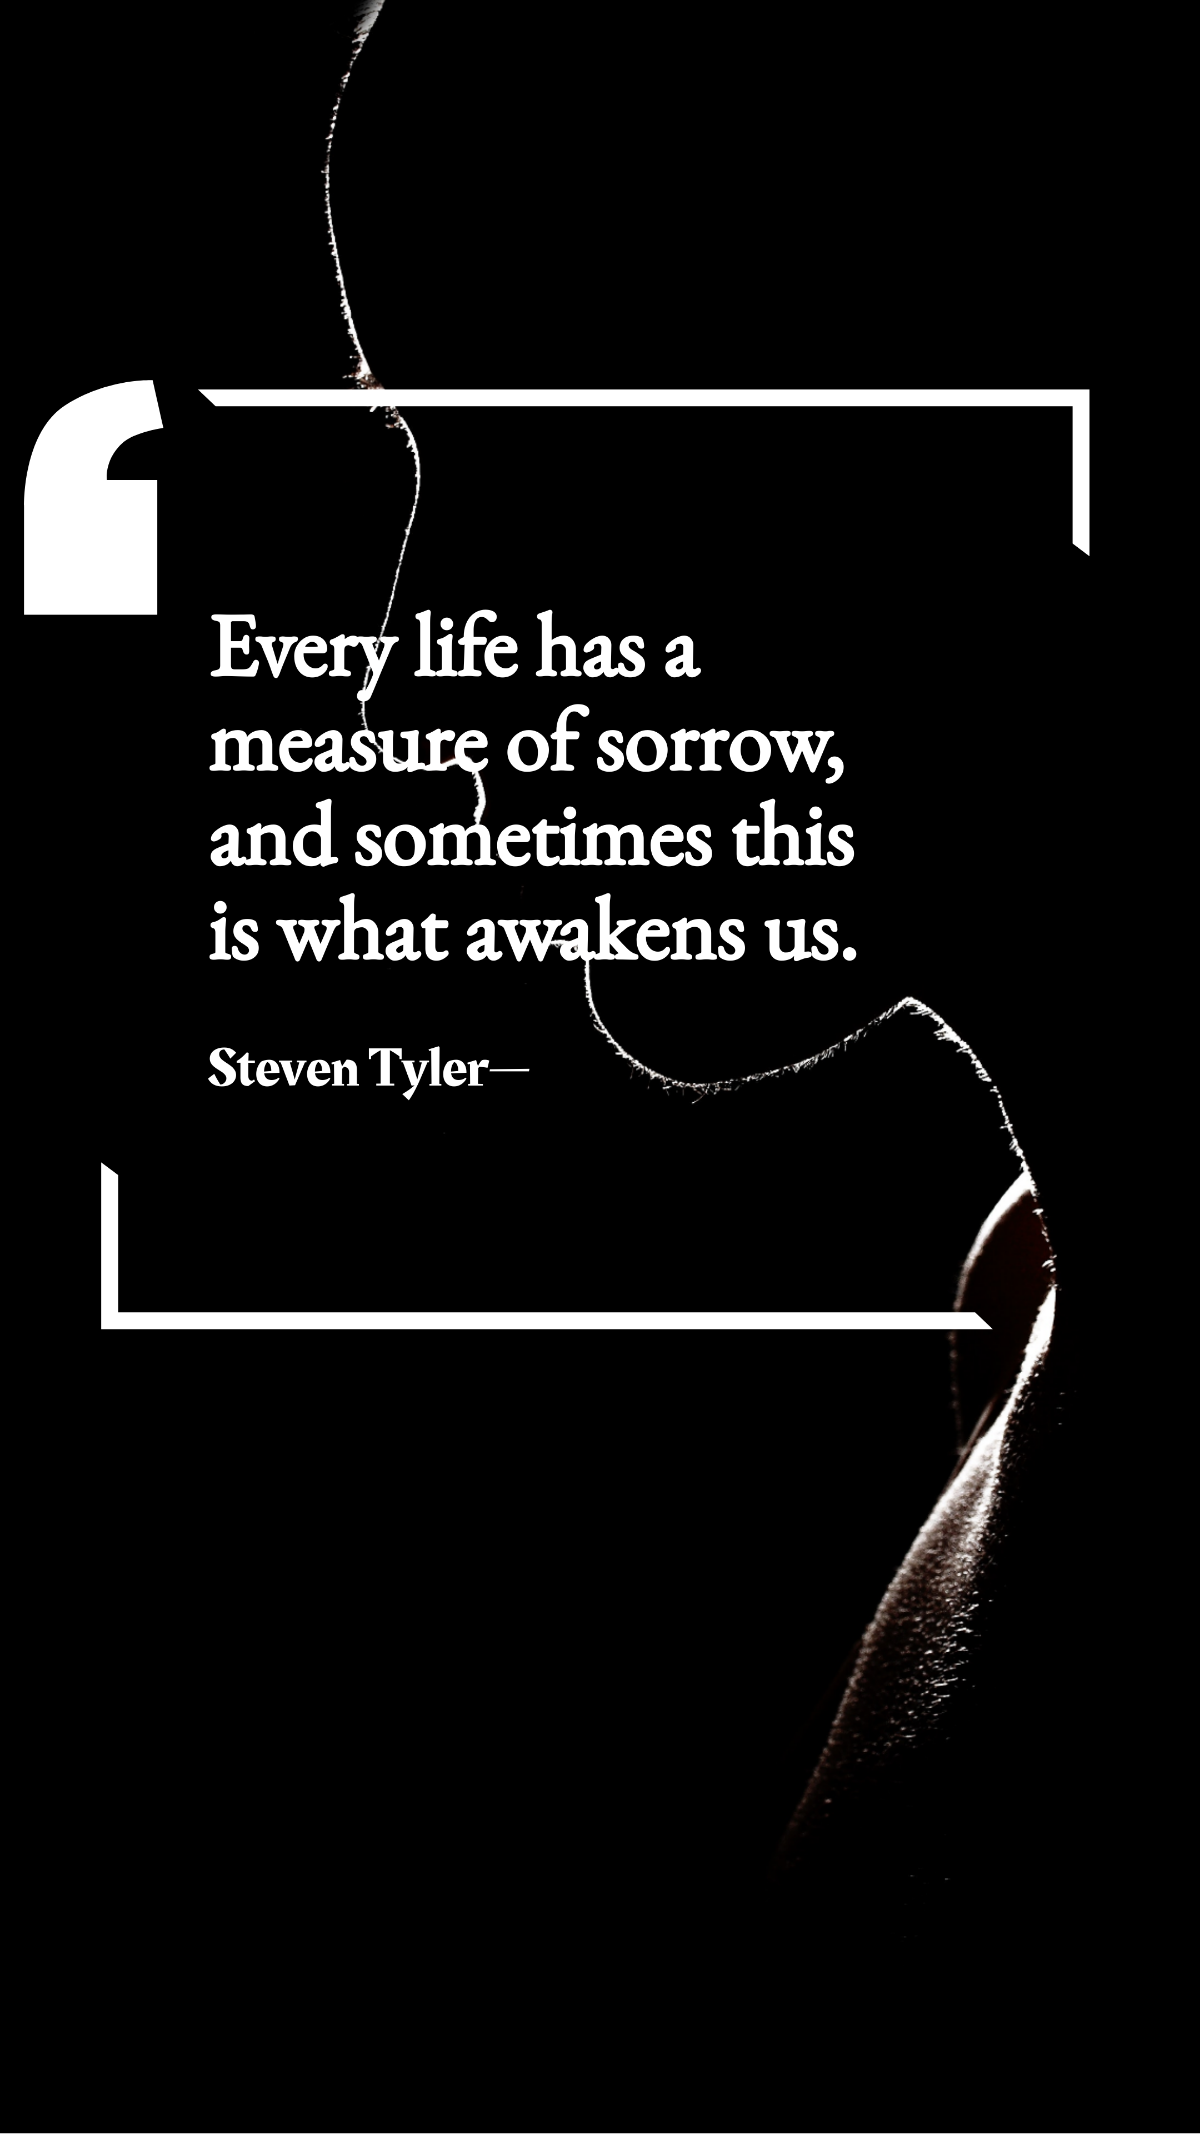 Steven Tyler - Every life has a measure of sorrow, and sometimes this is what awakens us. Template